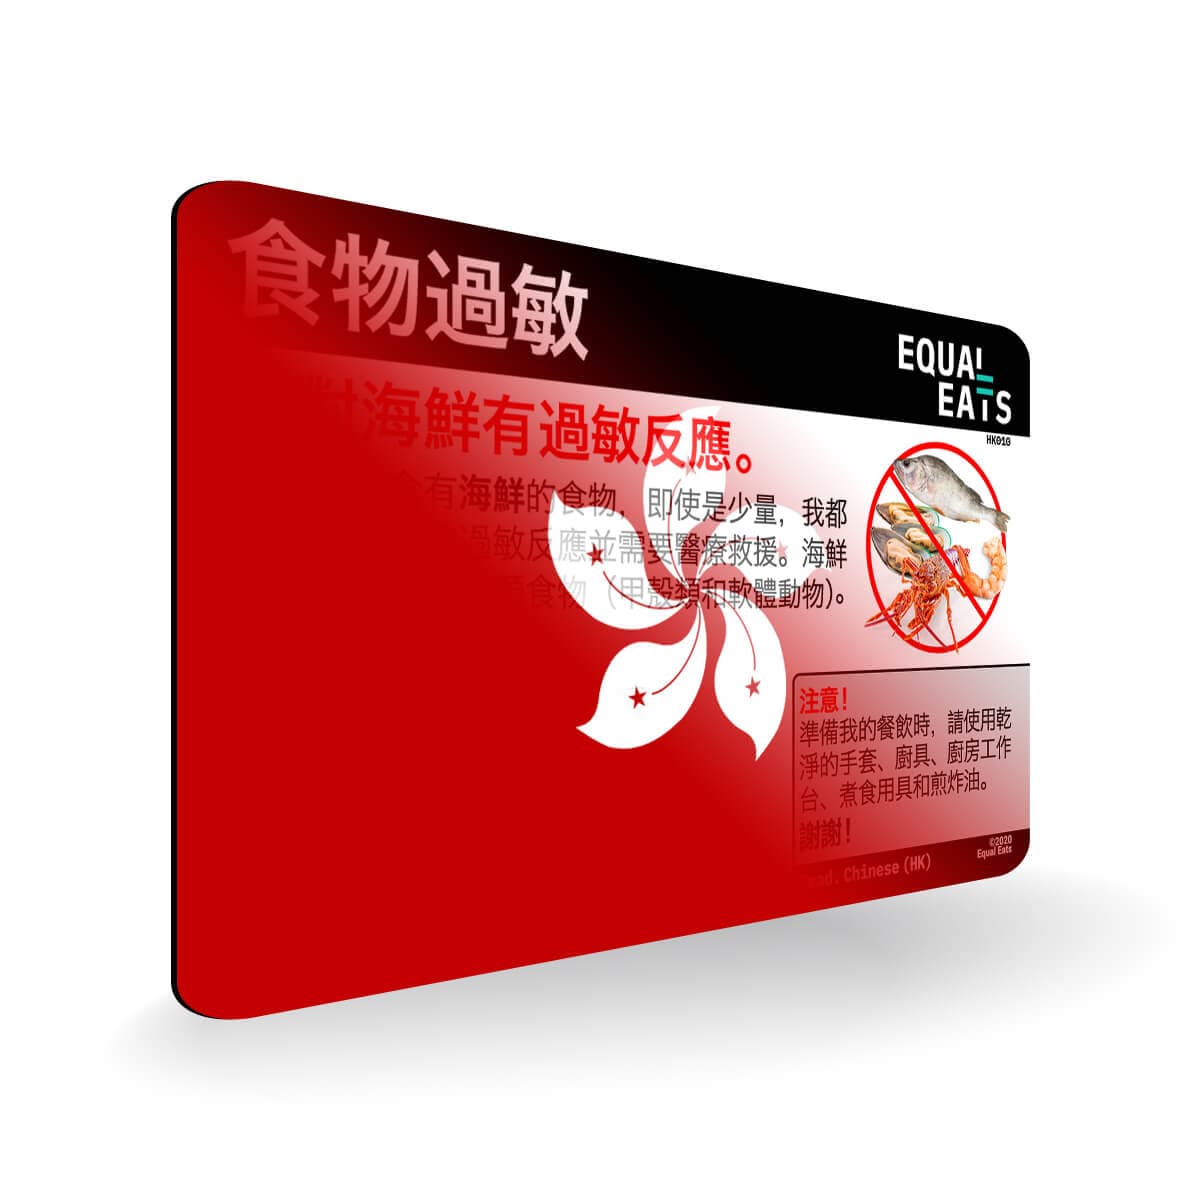 Seafood Allergy in Traditional Chinese. Seafood Allergy Card for Hong Kong